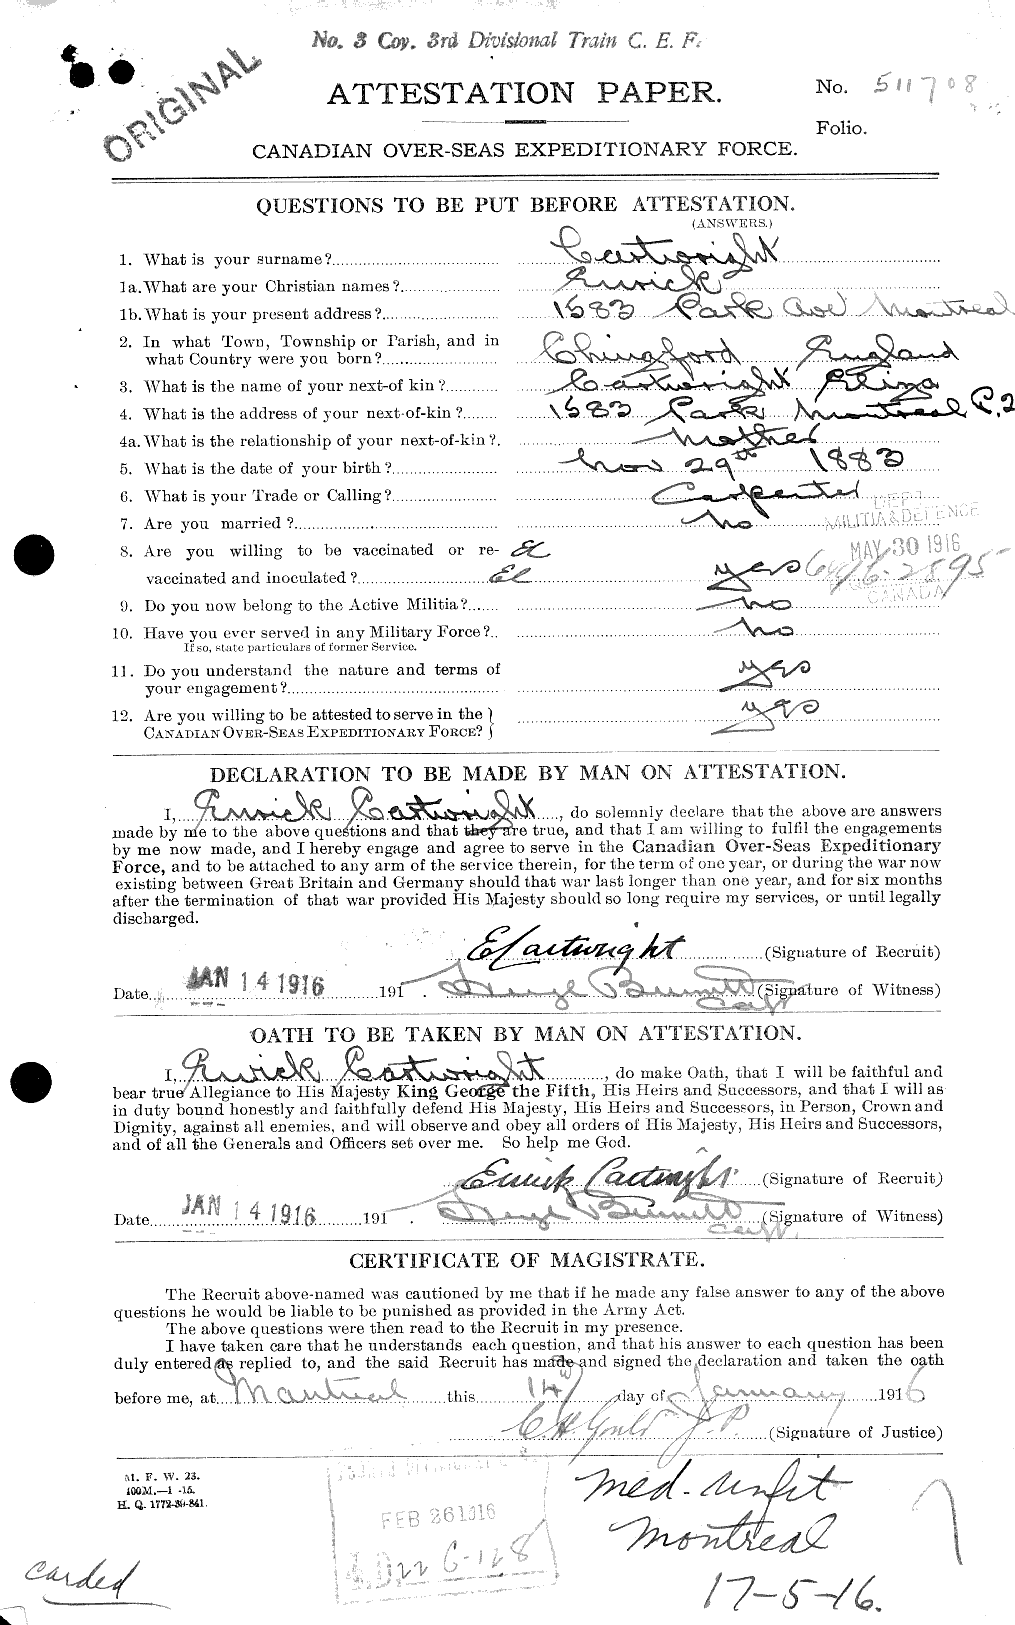 Personnel Records of the First World War - CEF 011569a